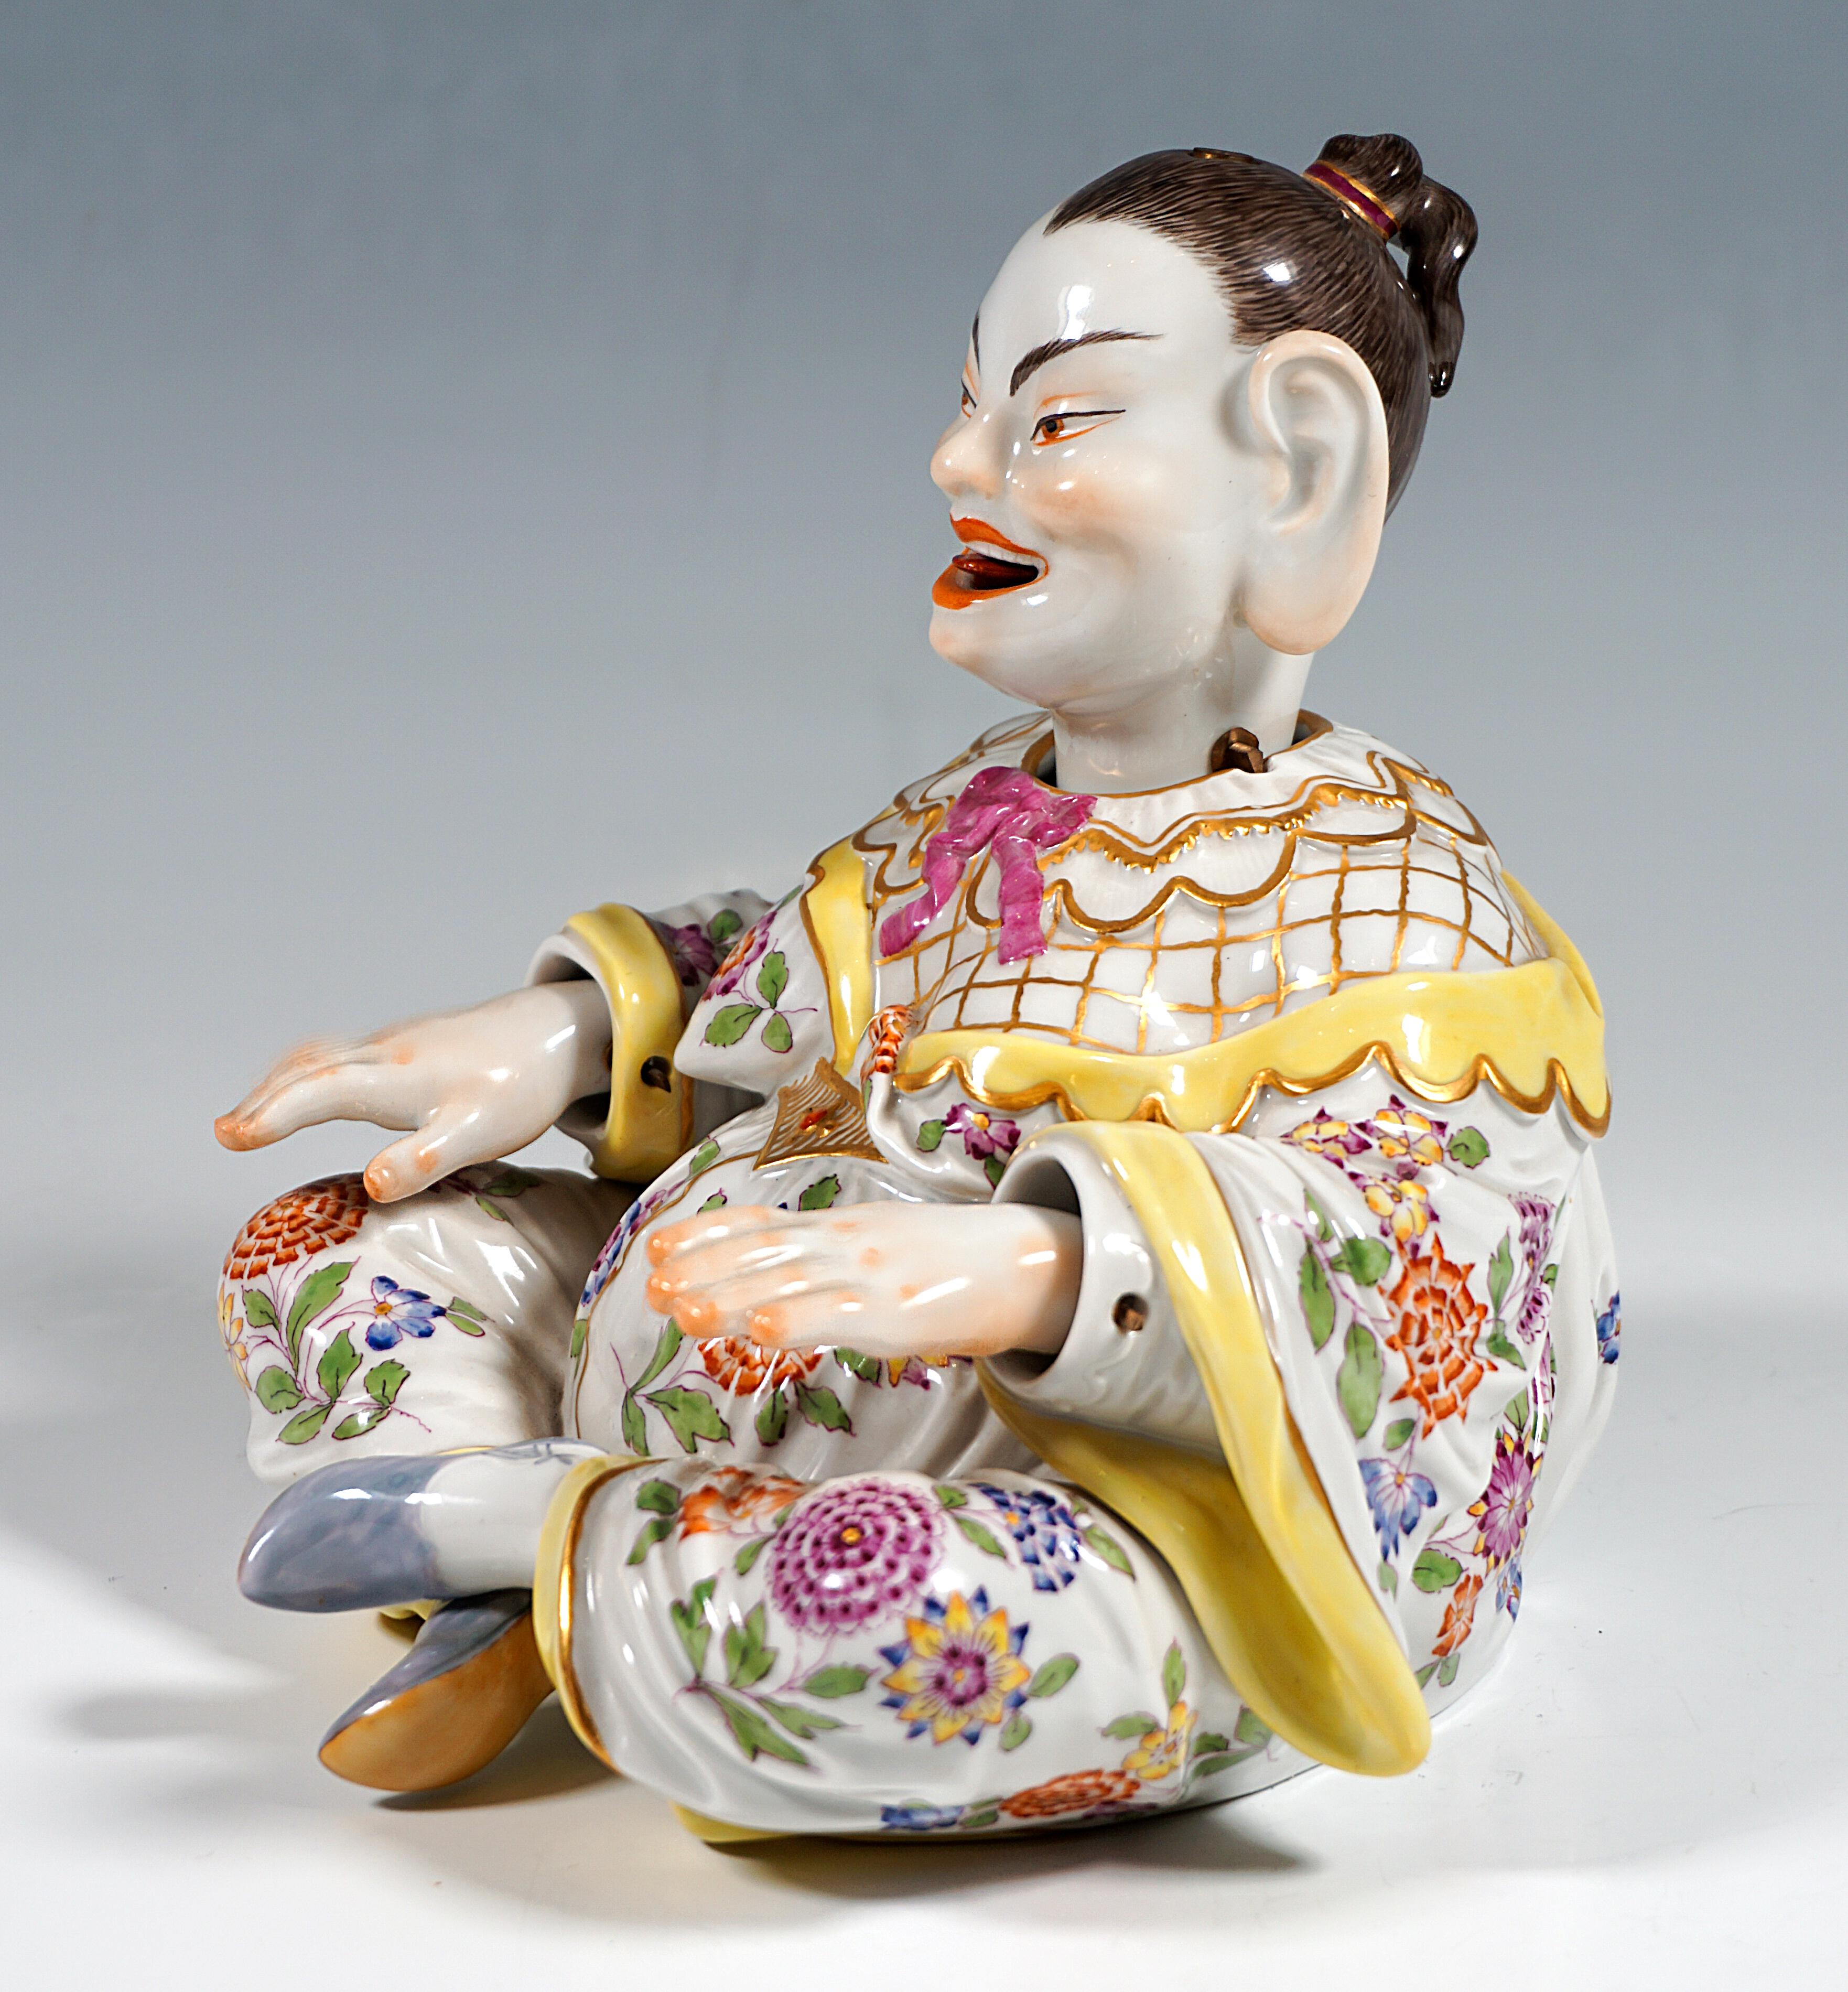 Hand-Crafted Meissen Porcelain Seated Buddha Figure As Wiggling Pagoda, By Kaendler, 20th